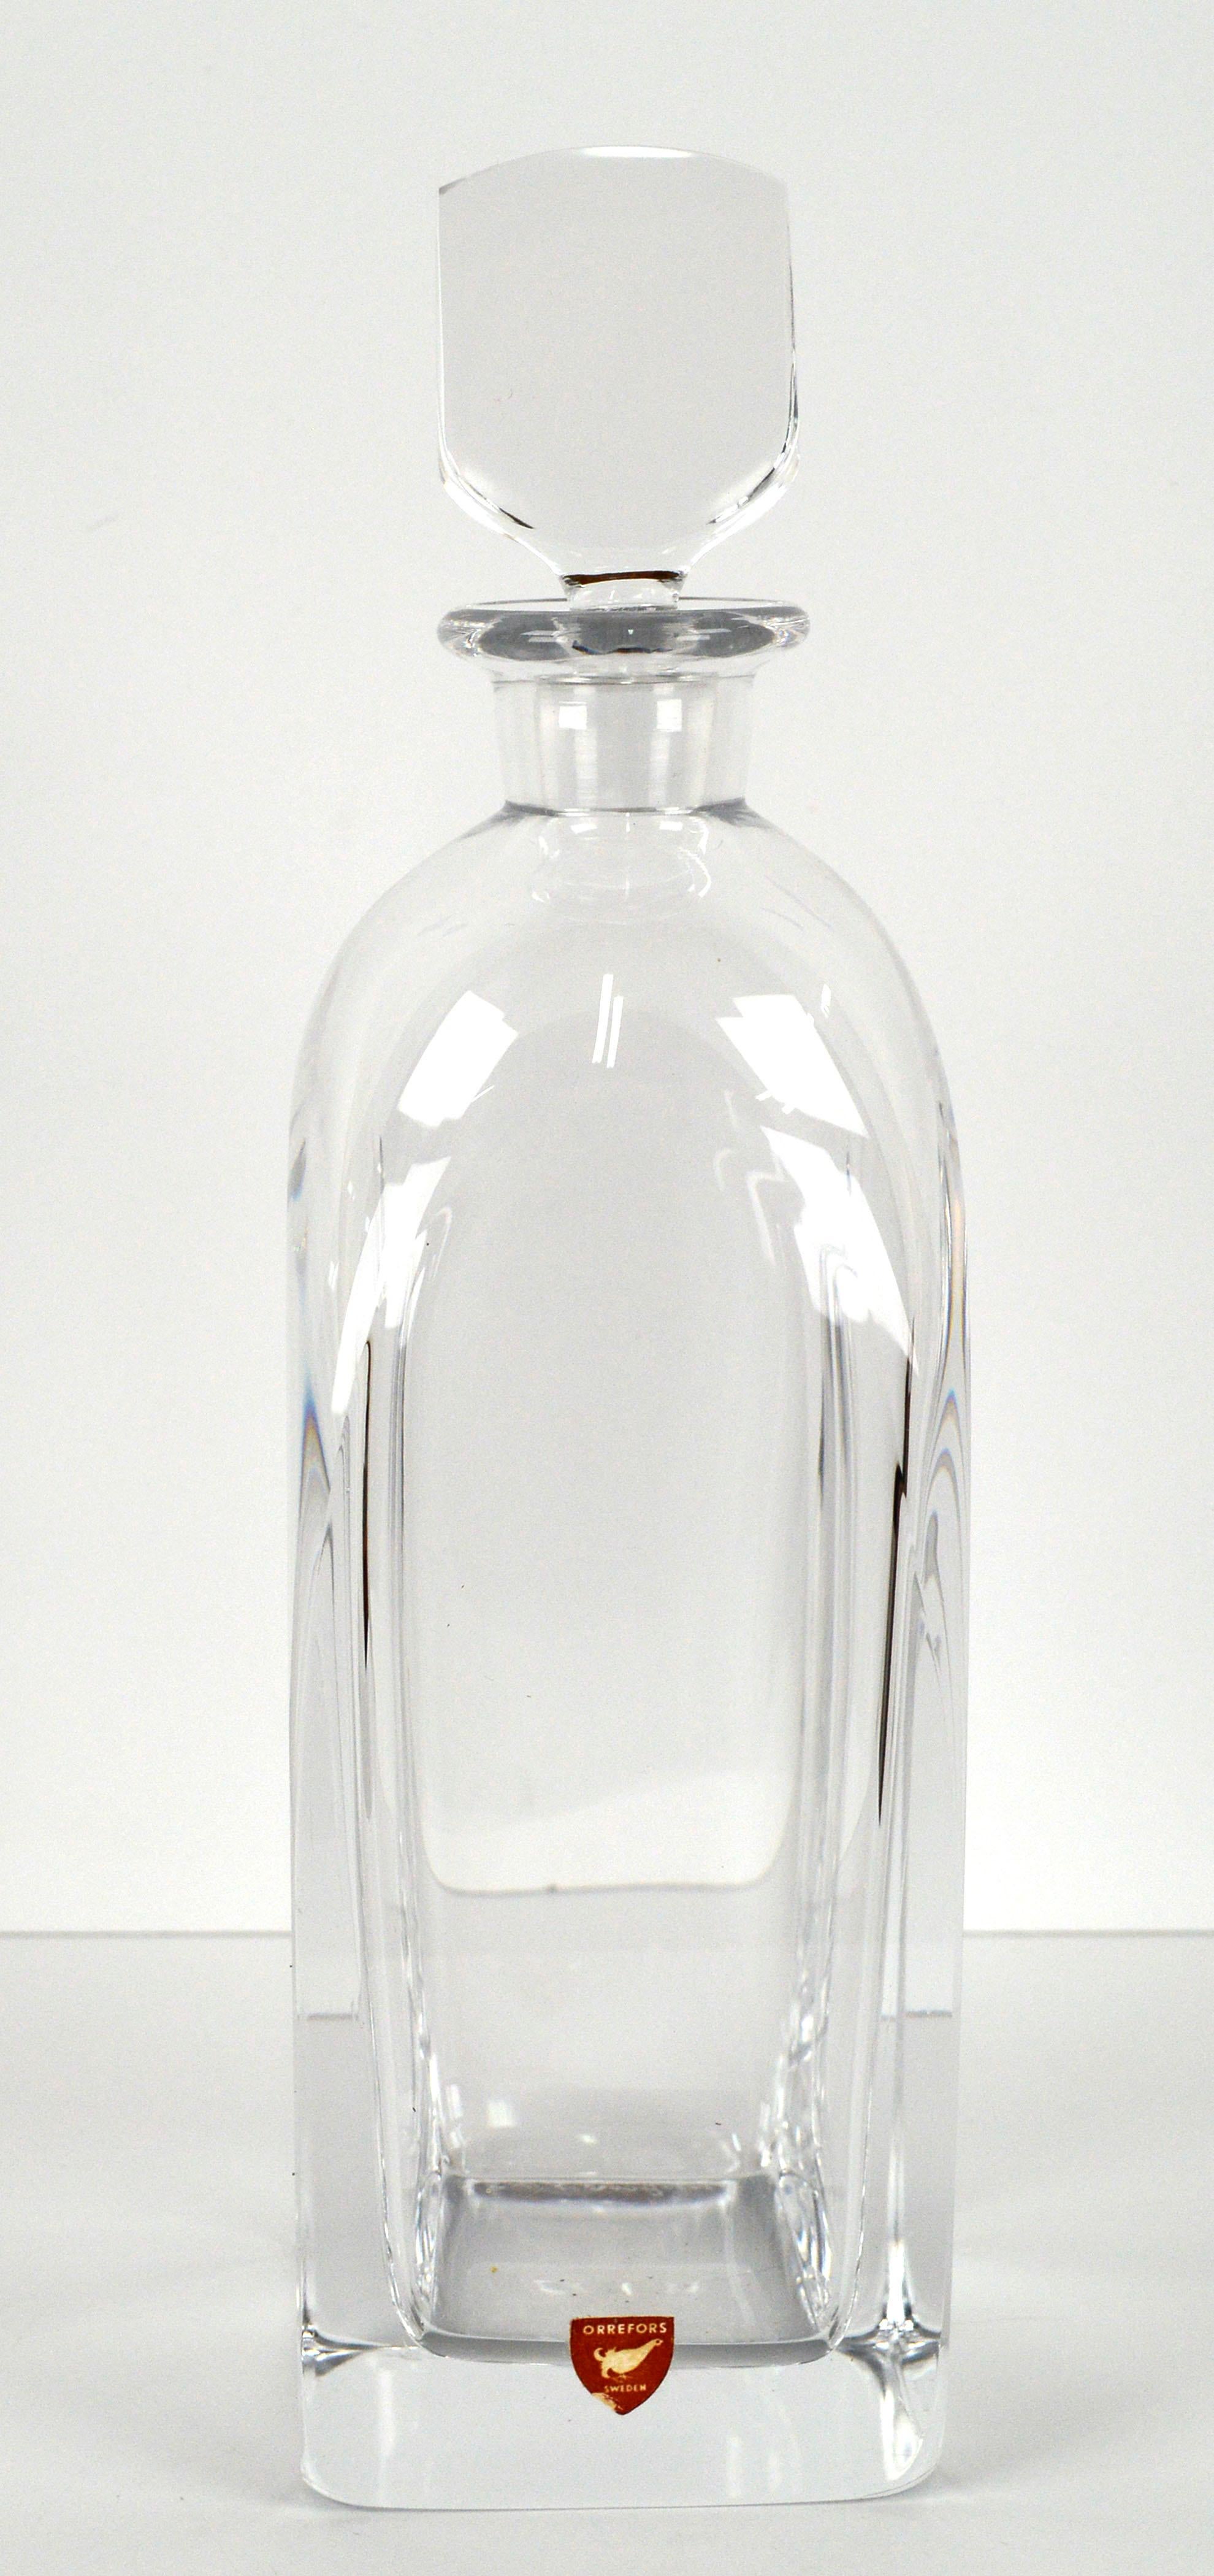 Elegant Mid-Century Modern vintage crystal decanter with stopper by Orrefors (Swedish, founded 1898), c. 1960's. Engraved signature to base Orrefors HM 2498 - this particular style was by Edvard Hall. 

Includes original red Orrefors Sweden